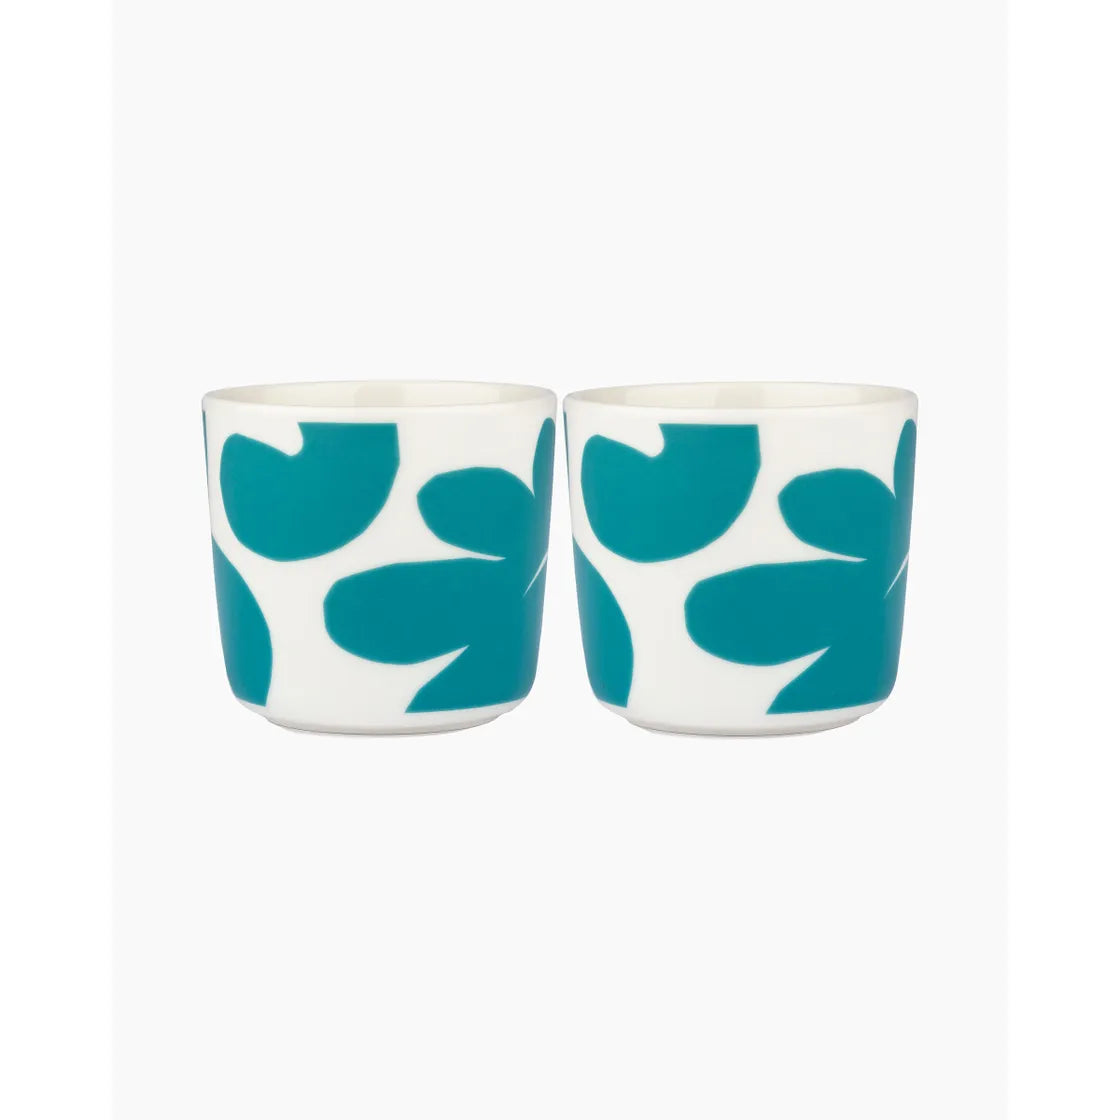 Oiva / Leikko coffee cup 2dl, without handle, 2 pcs white / teal 071596 170